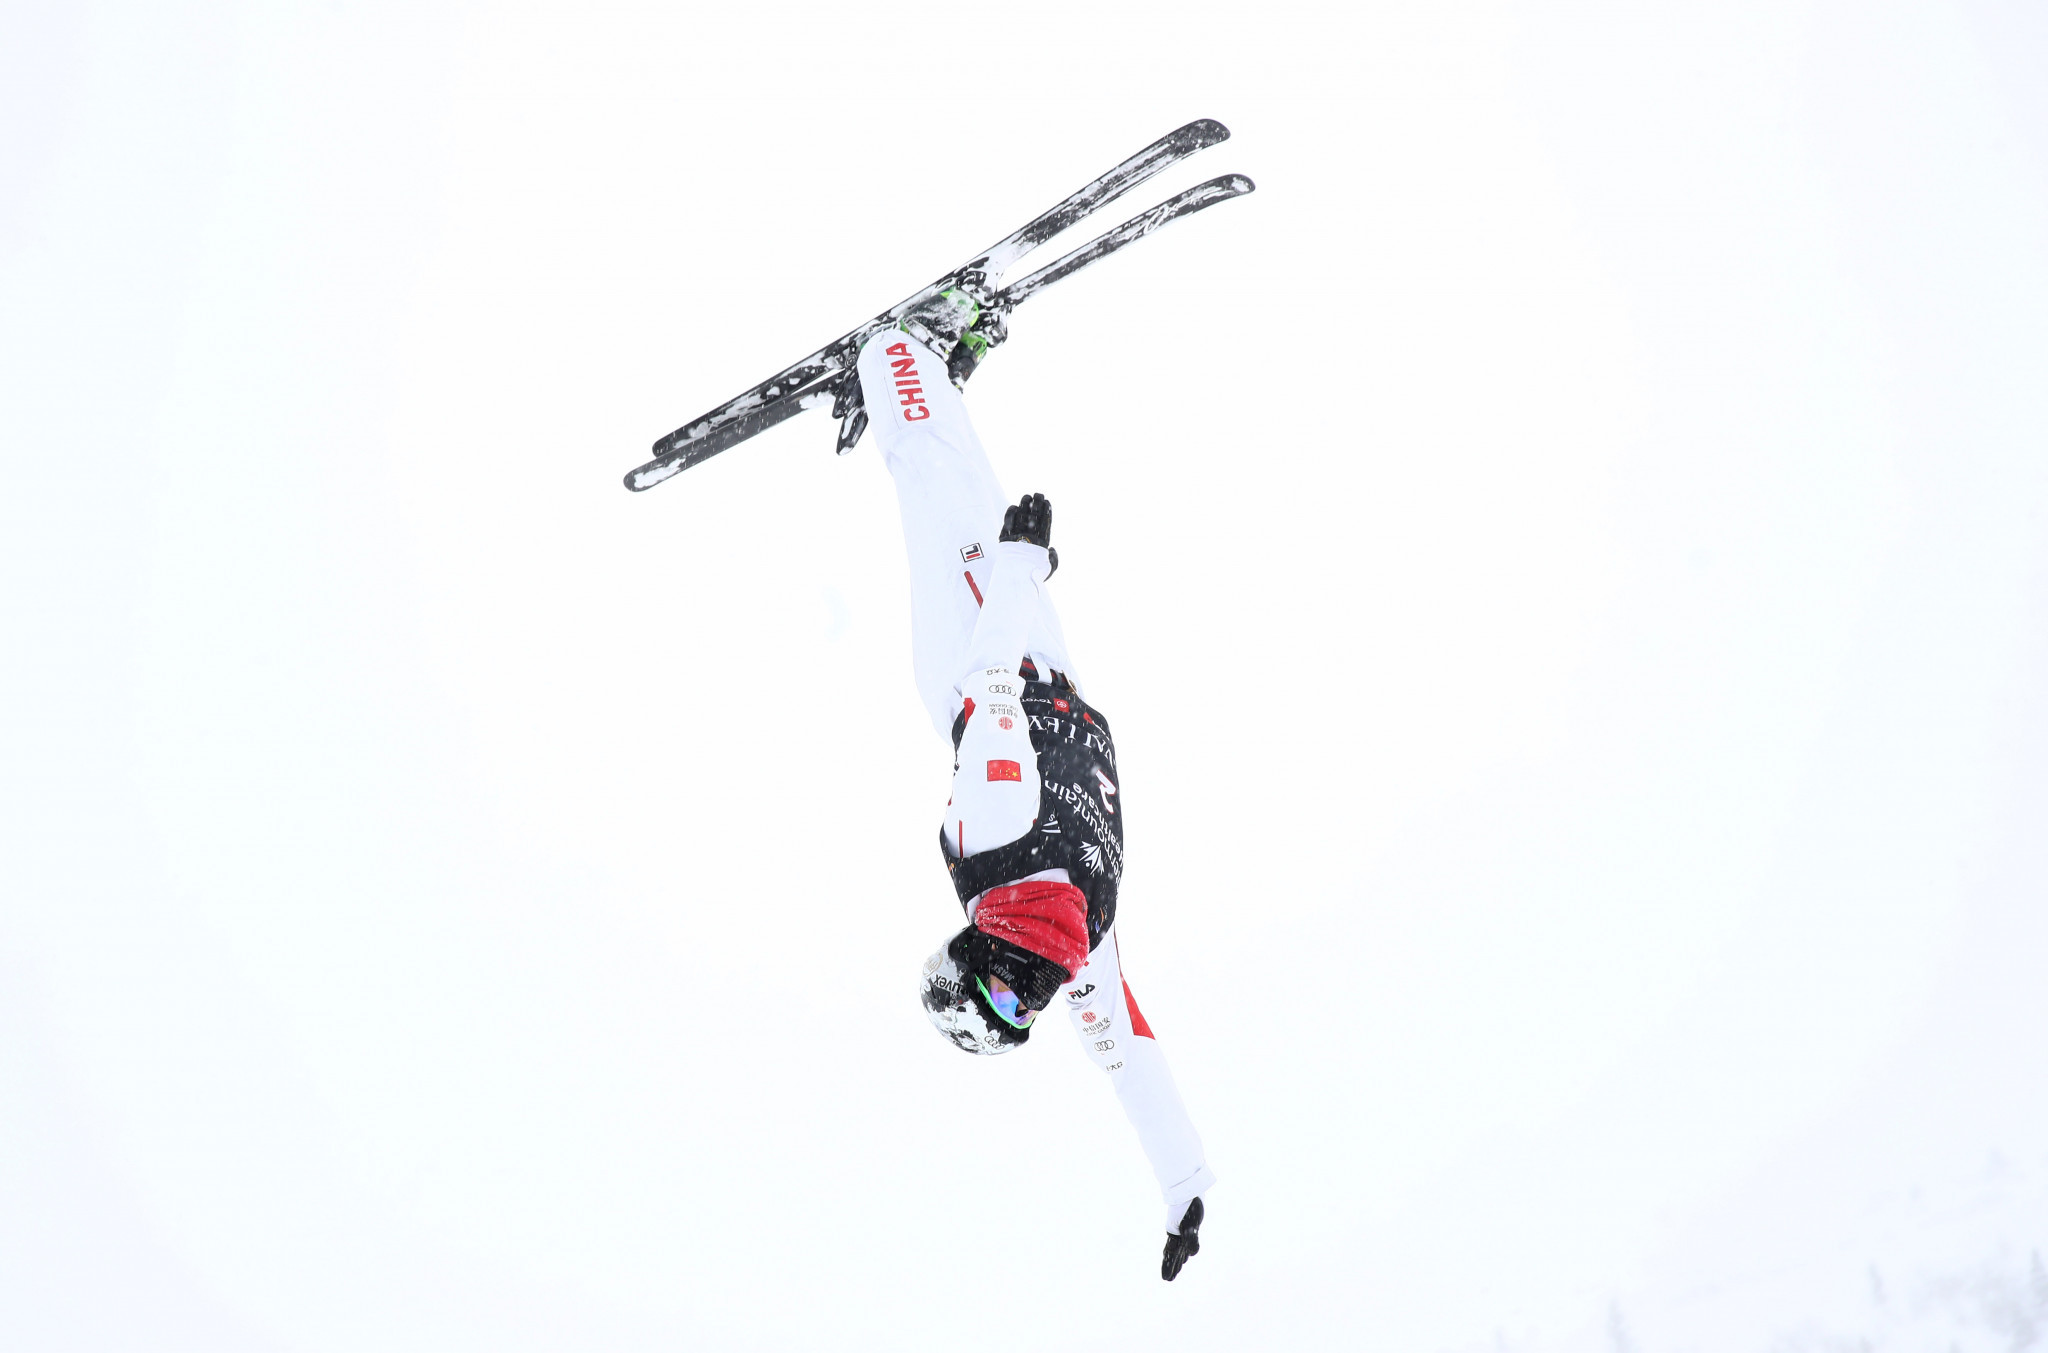 Wang Xindi was confirmed as the winner of the men's overall aerials title ©Getty Images